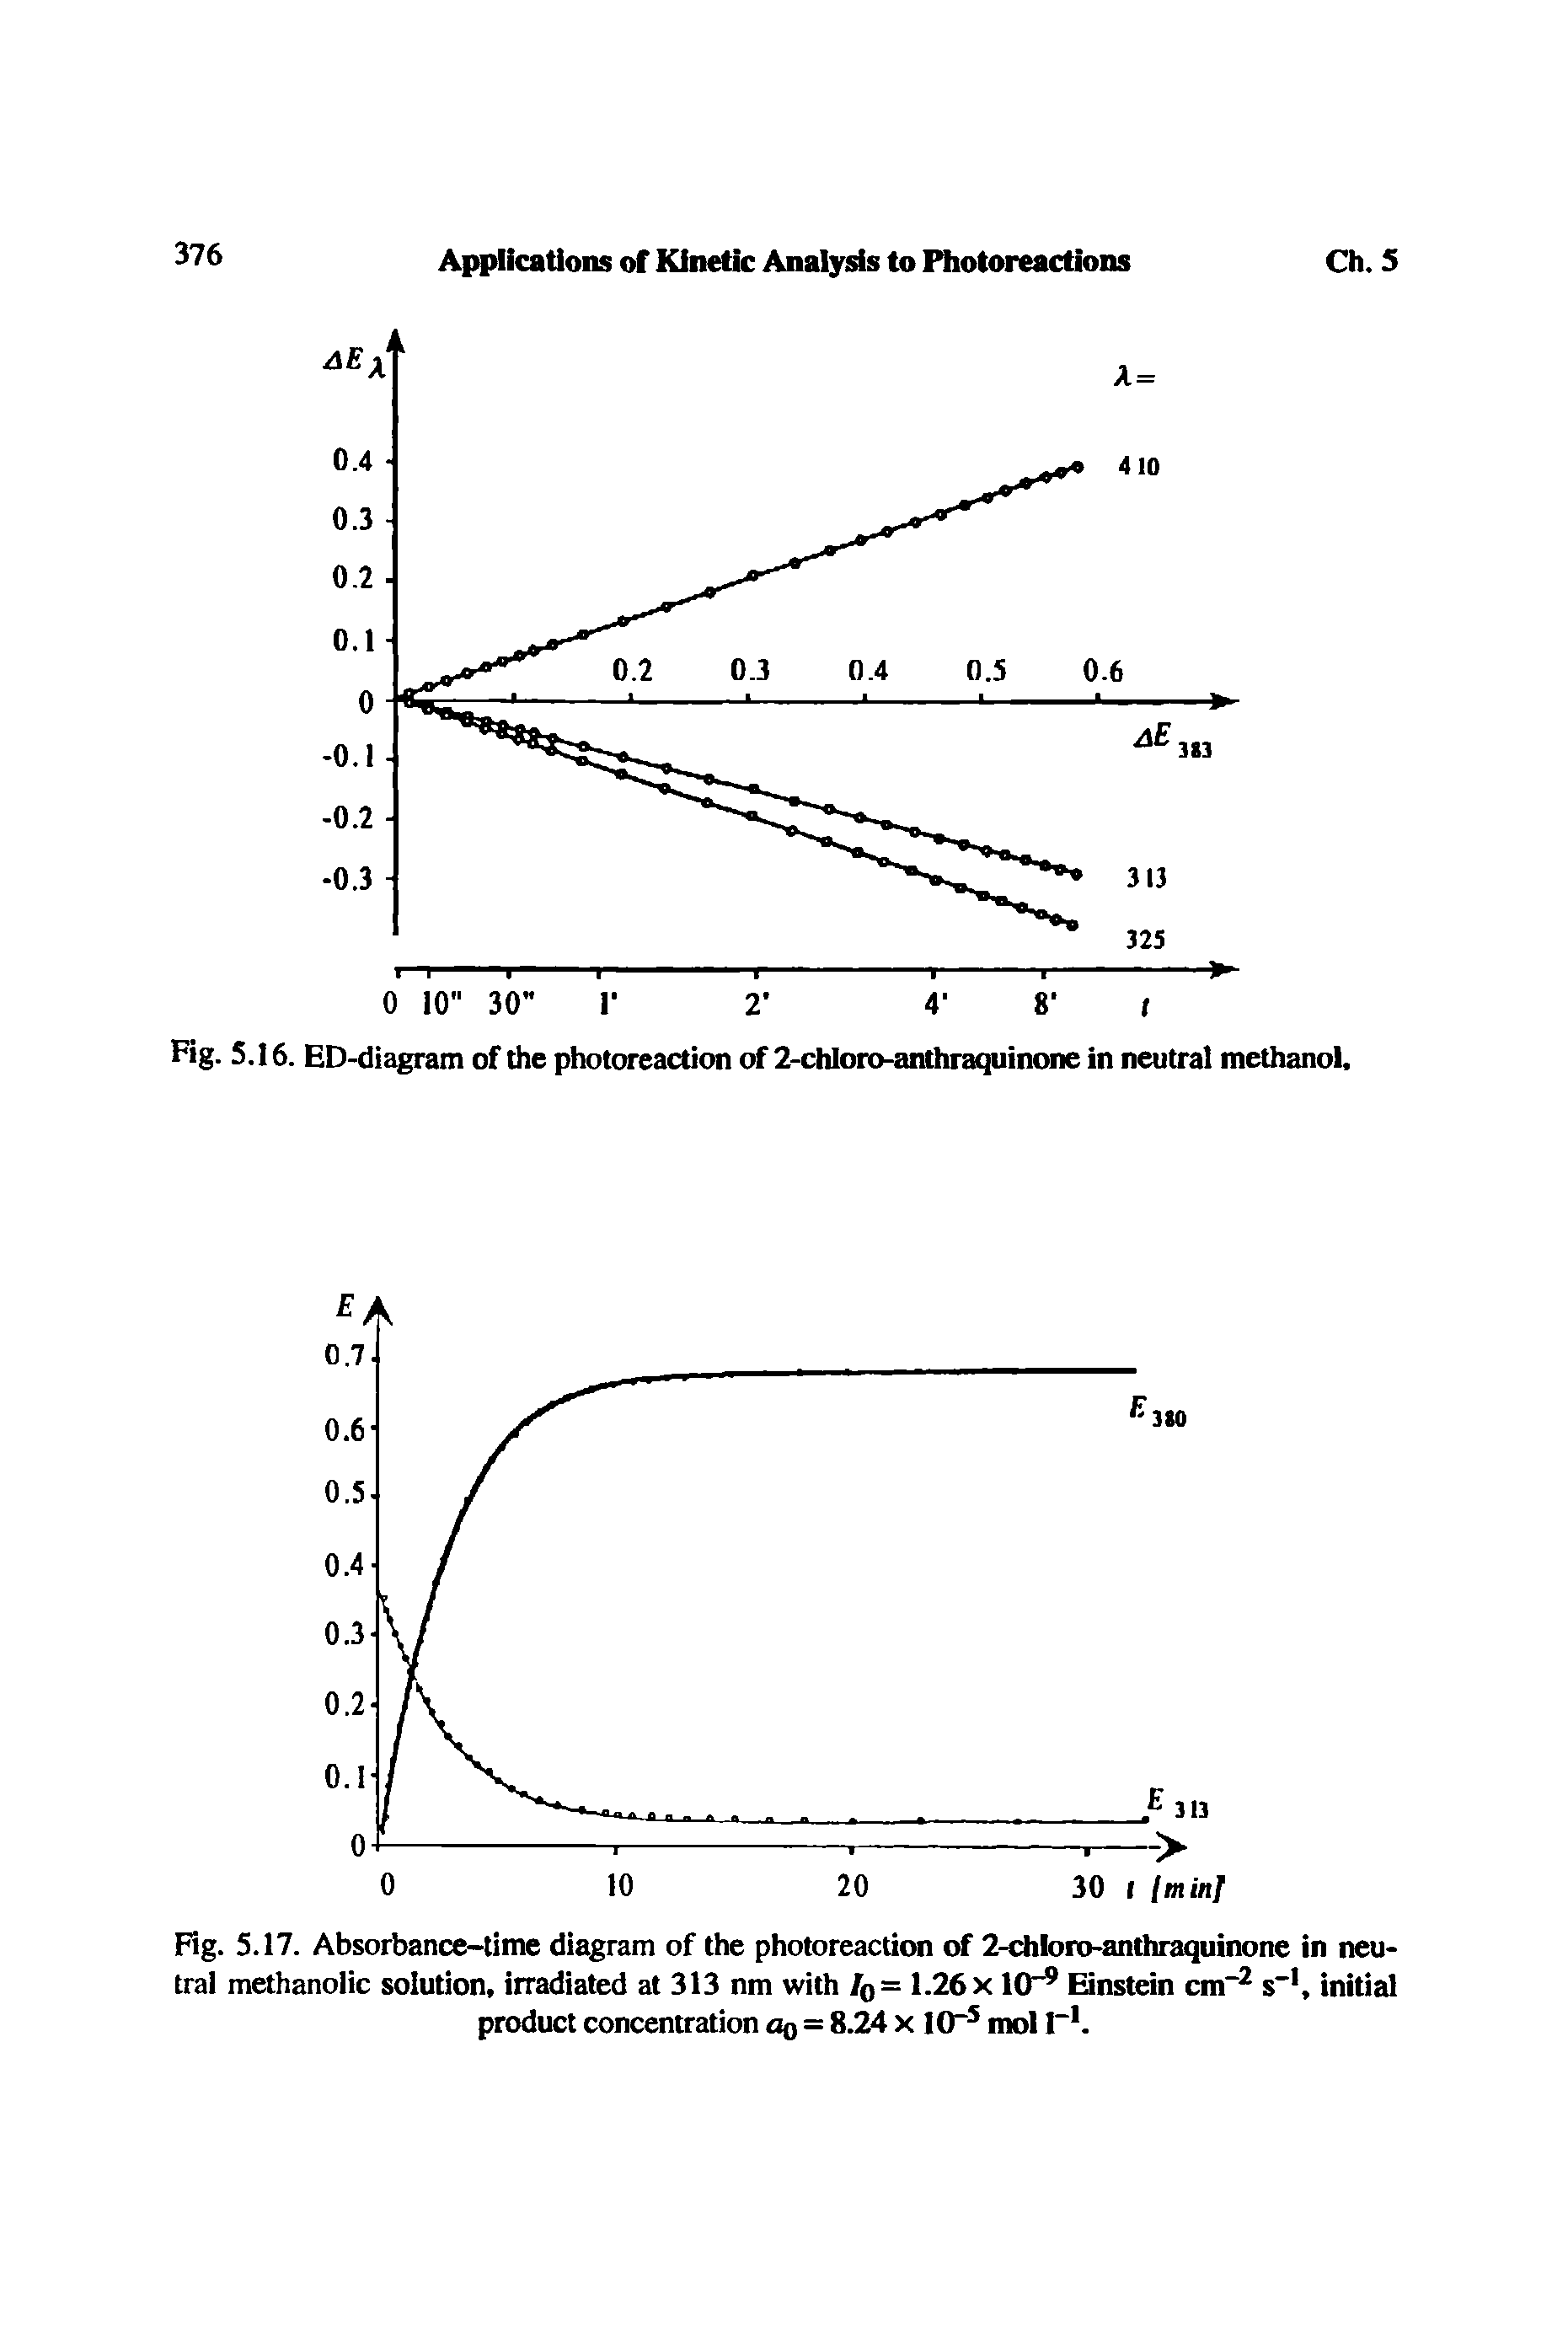 Fig. S.17. Absorbance-time diagram of the photoreaction of 2-chloro-anthraquinone in neutral methanolic solution, irradiated at 313 nm with /q= 1.26 x KT Einstein cm s", initial product concentration oq = 8.24 x 10 mol T. ...